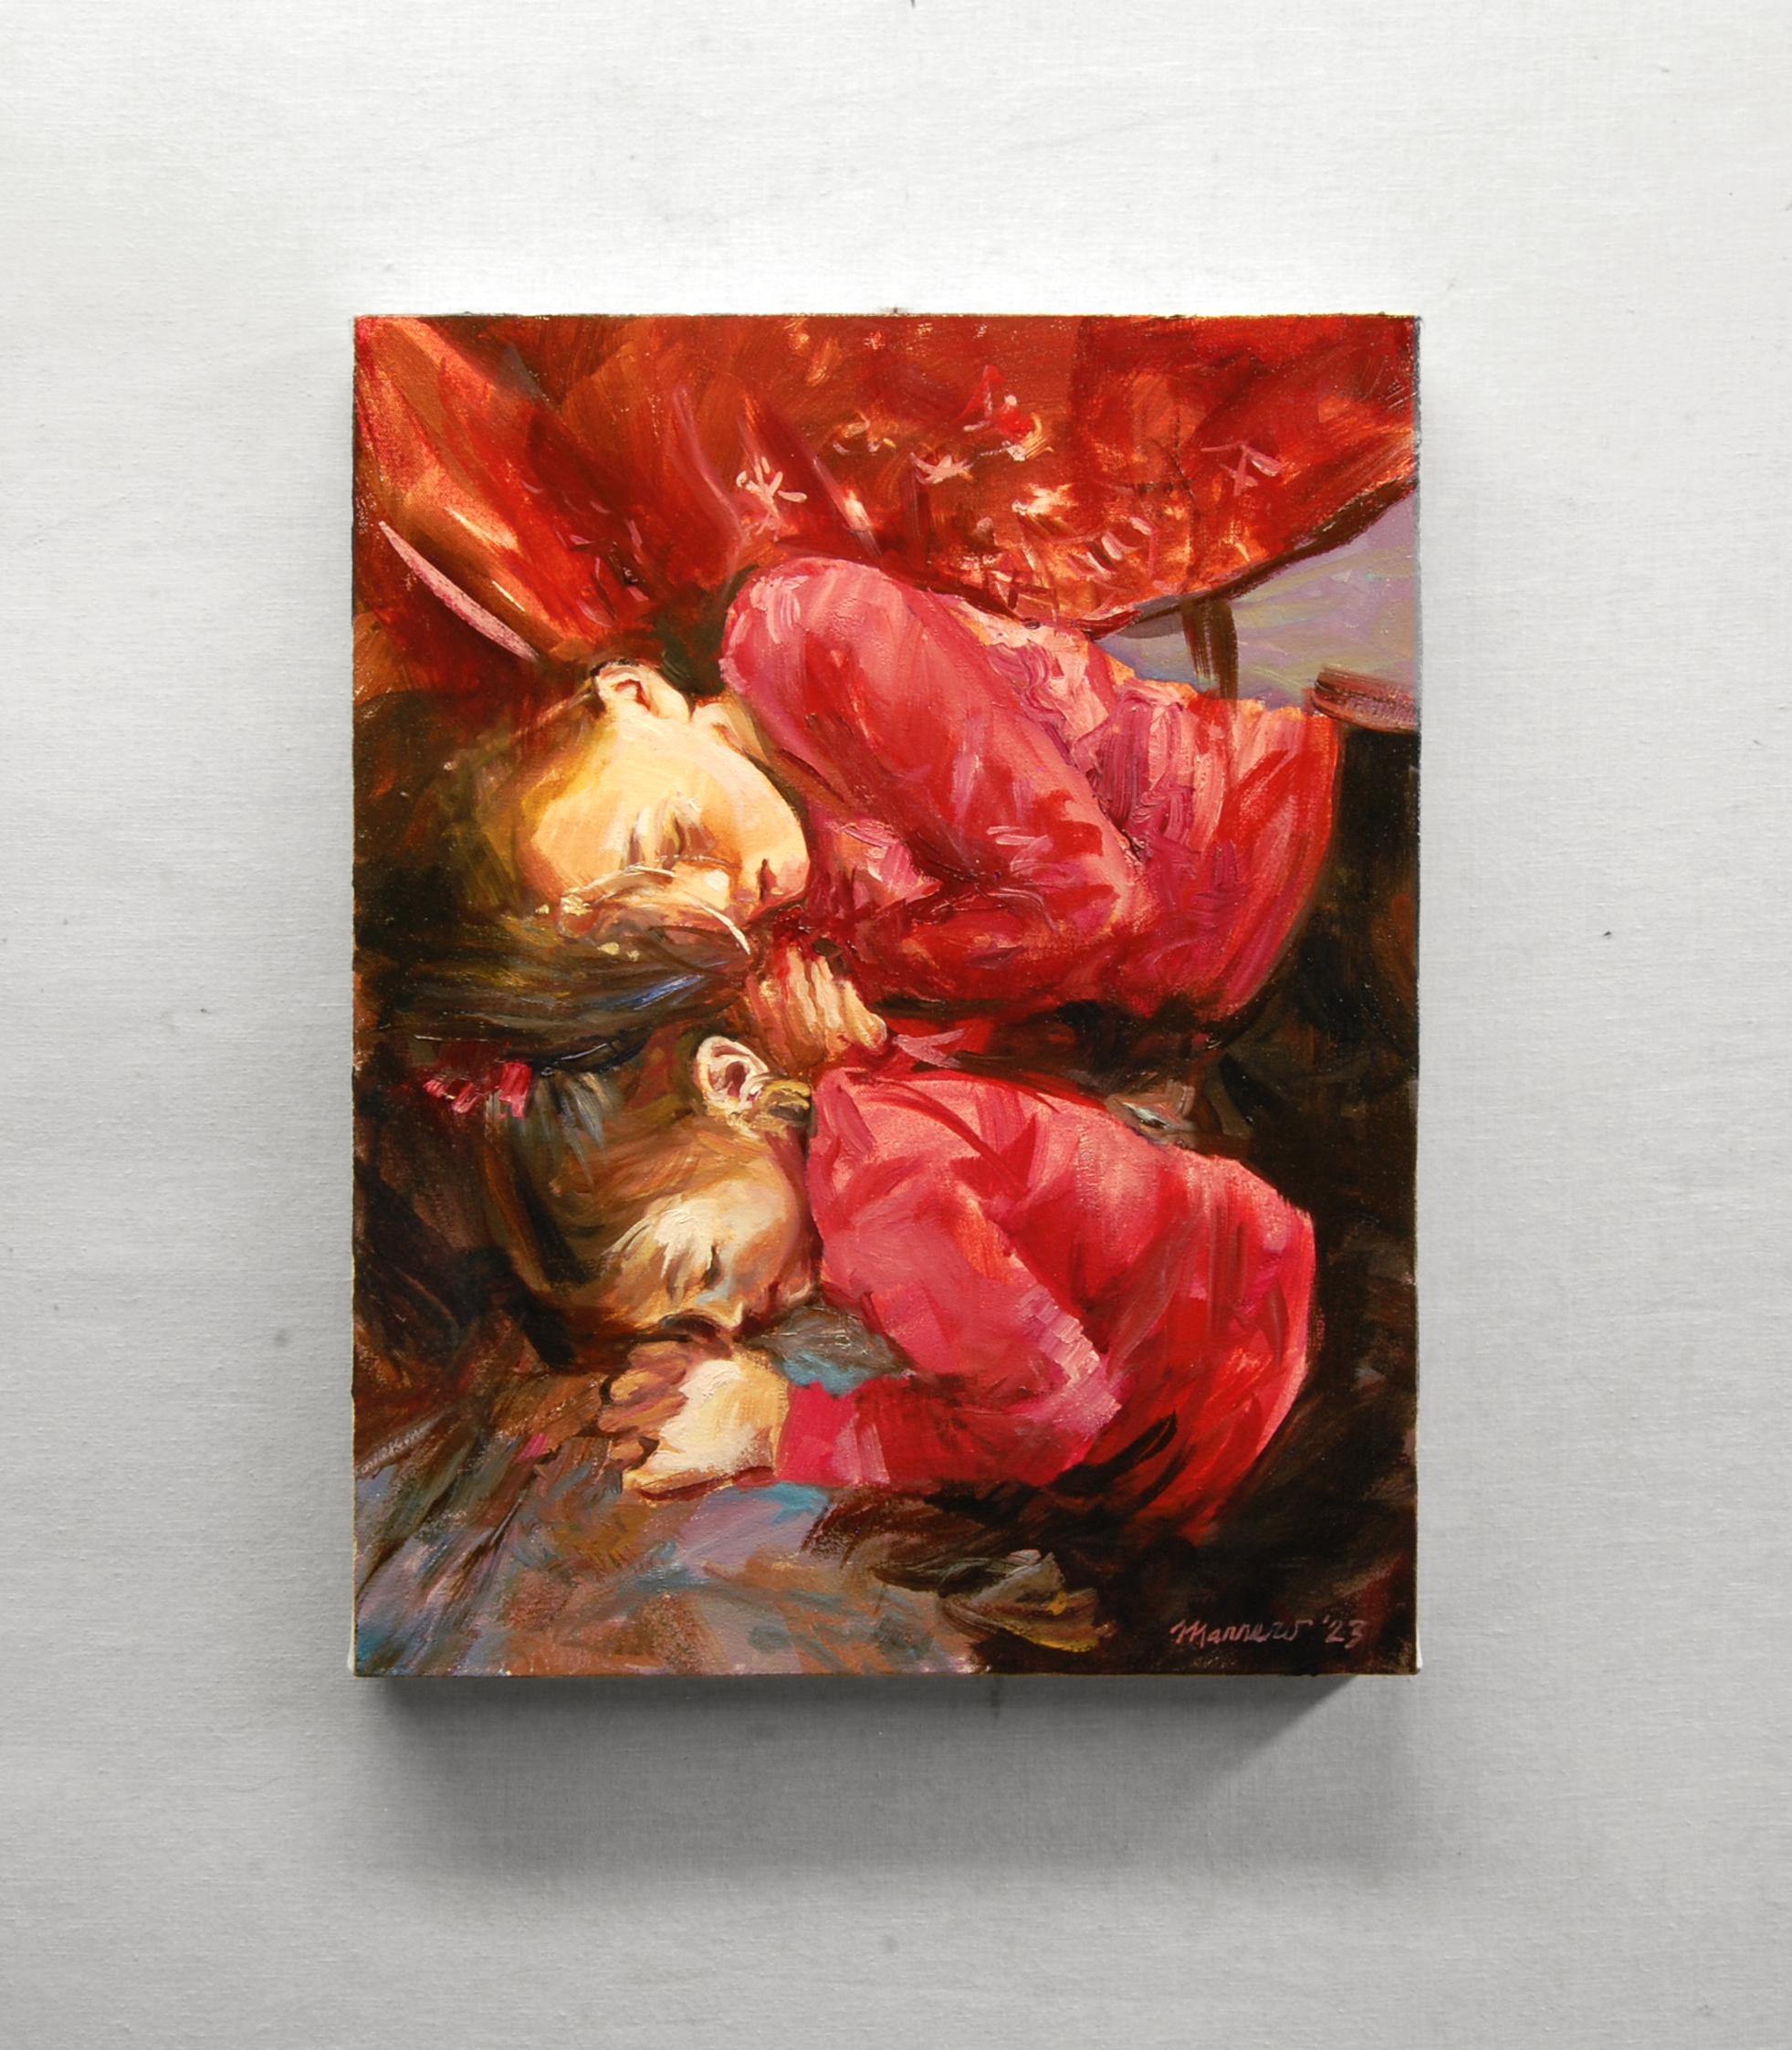 <p>Artist Comments<br>Two young girls in red go daydreaming in artist Onelio Marrero's heartwarming portrait. He features his two granddaughters curled up in deep slumber. The reds and star patterns of the cloth reflect a hint of their dreams.